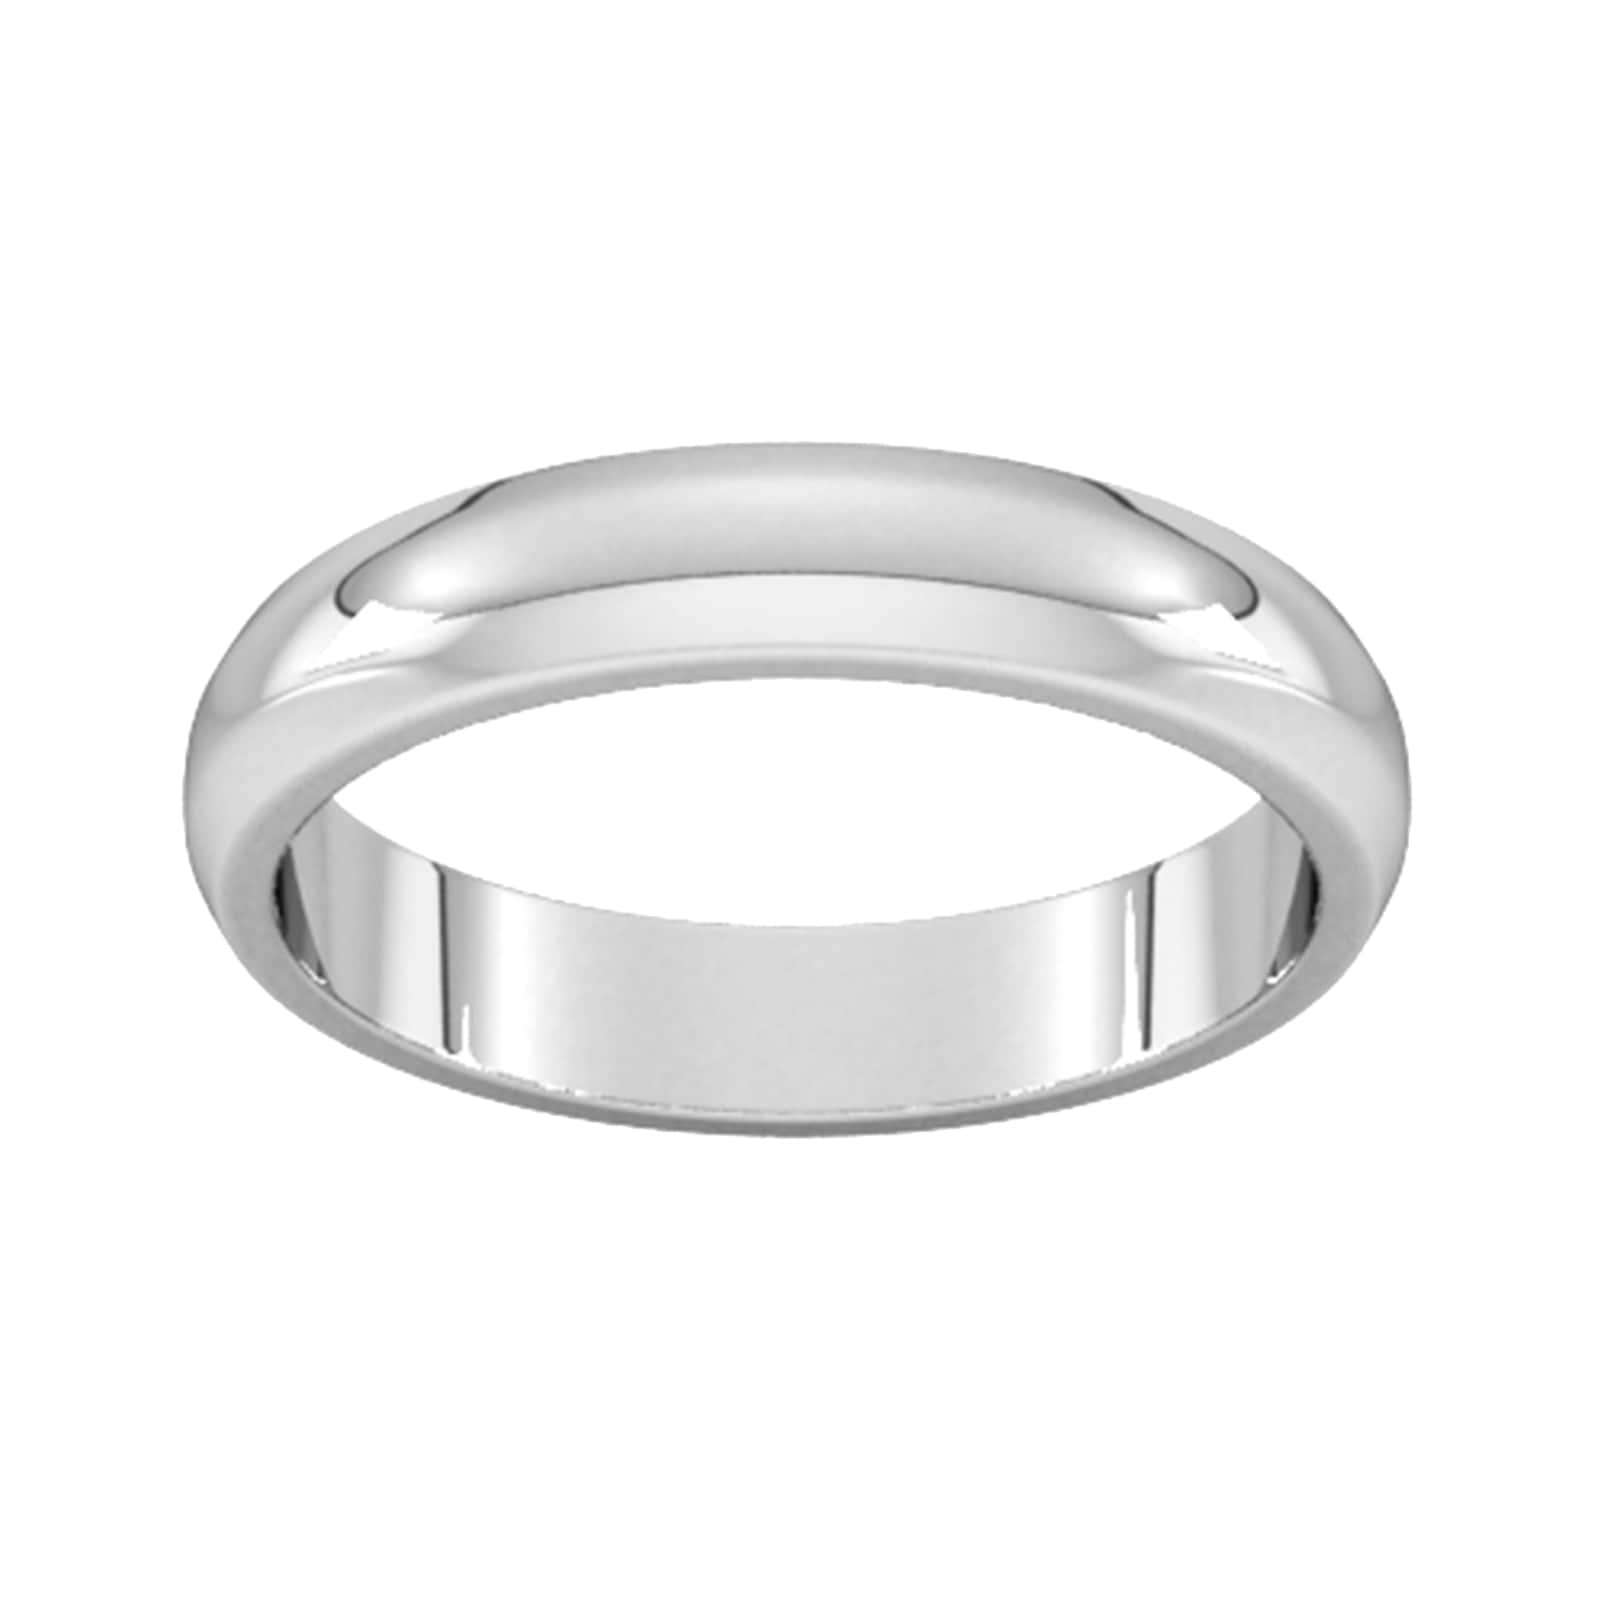 4mm D Shape Heavy Wedding Ring In Sterling Silver - Ring Size Q